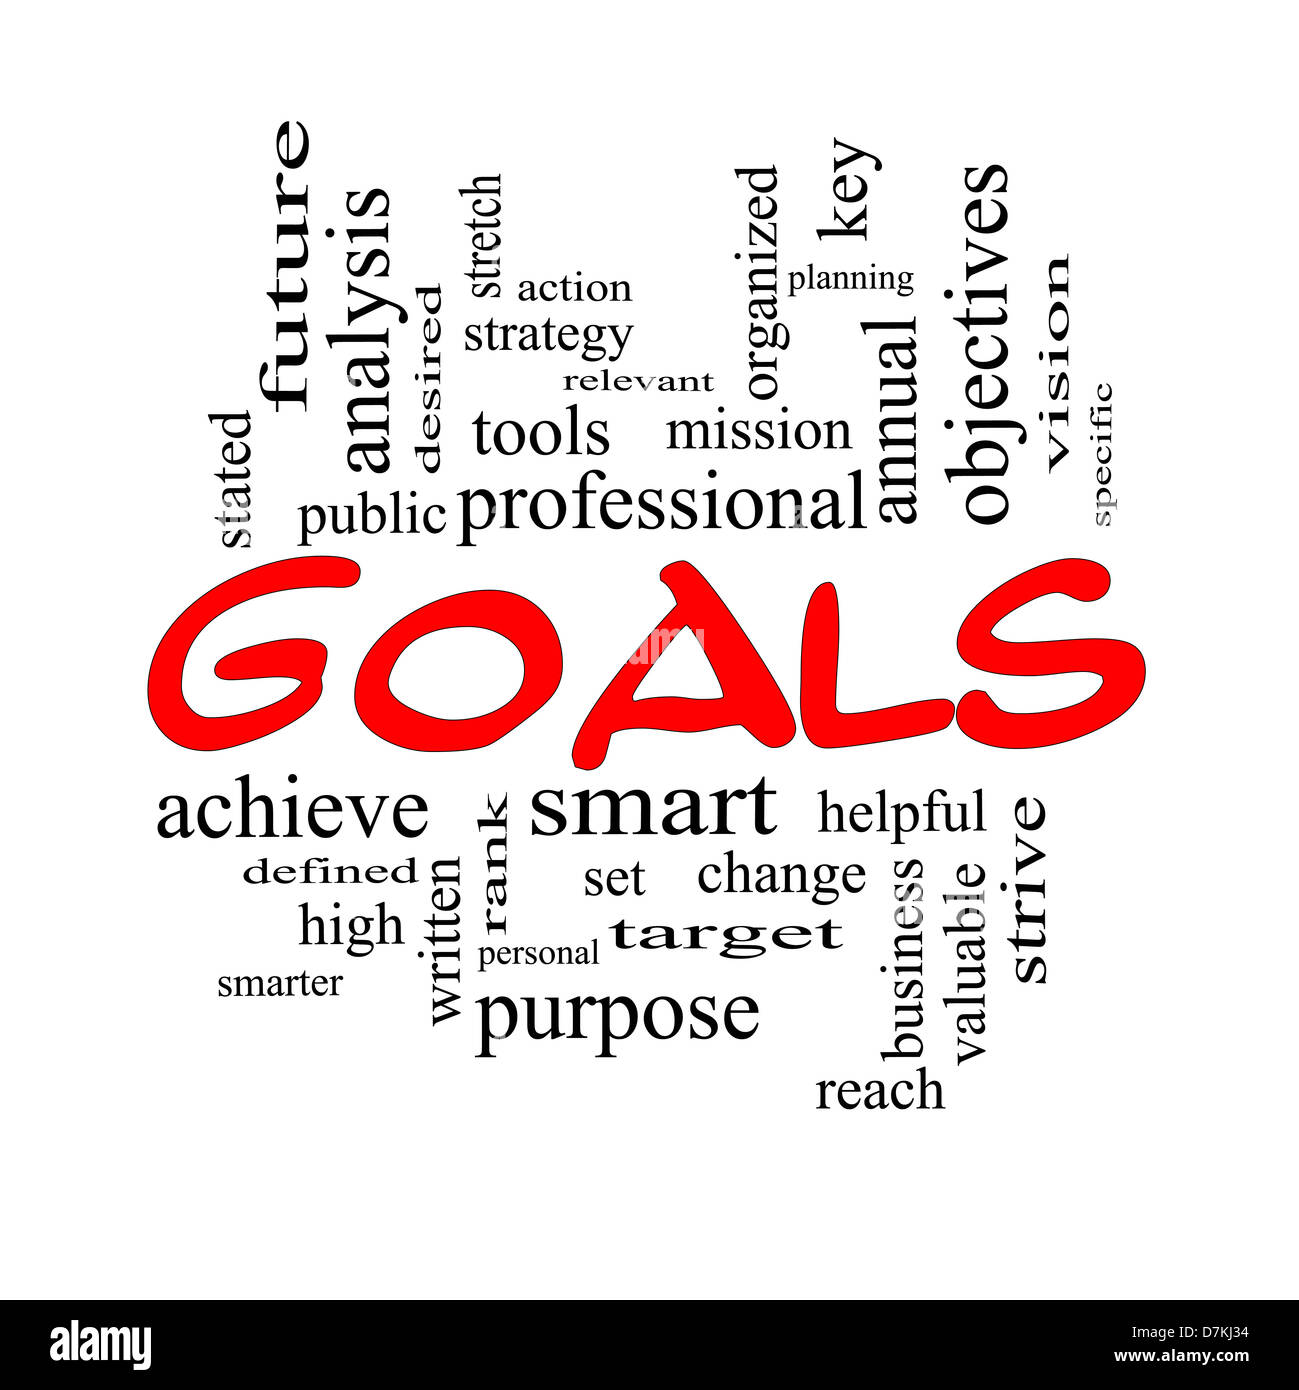 Goals Word Cloud Concept in red and black with great terms such as planning, missions, smart, set, high and more. Stock Photo